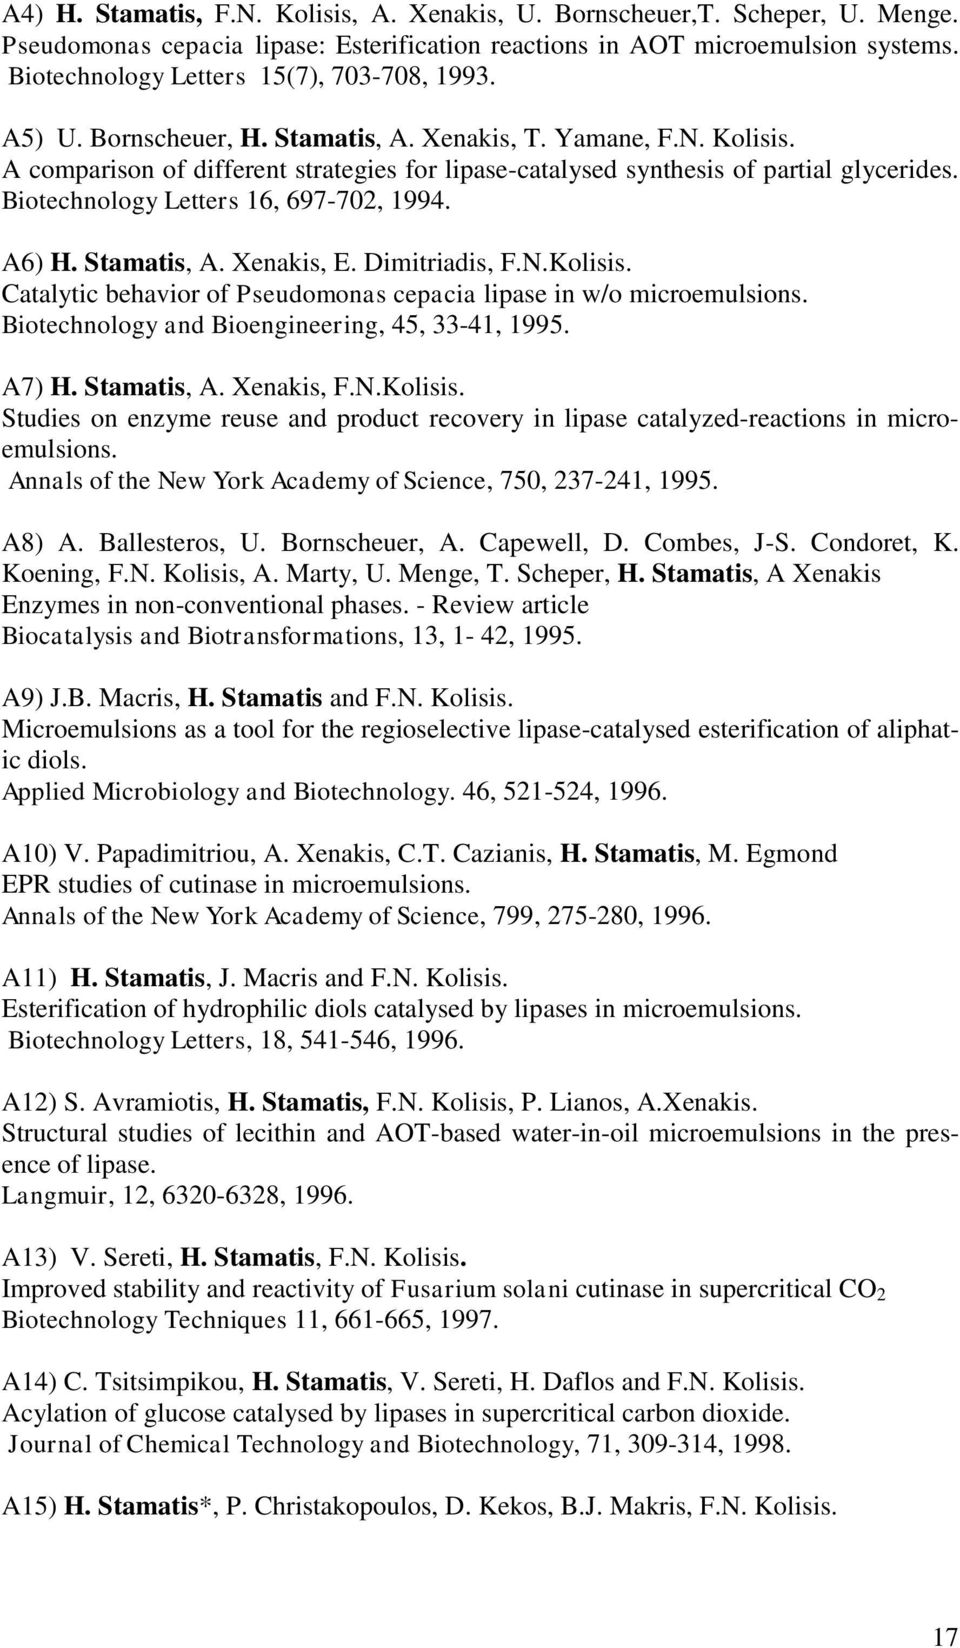 A comparison of different strategies for lipase-catalysed synthesis of partial glycerides. Biotechnology Letters 16, 697-702, 1994. A6) H. Stamatis, A. Xenakis, E. Dimitriadis, F.N.Kolisis.